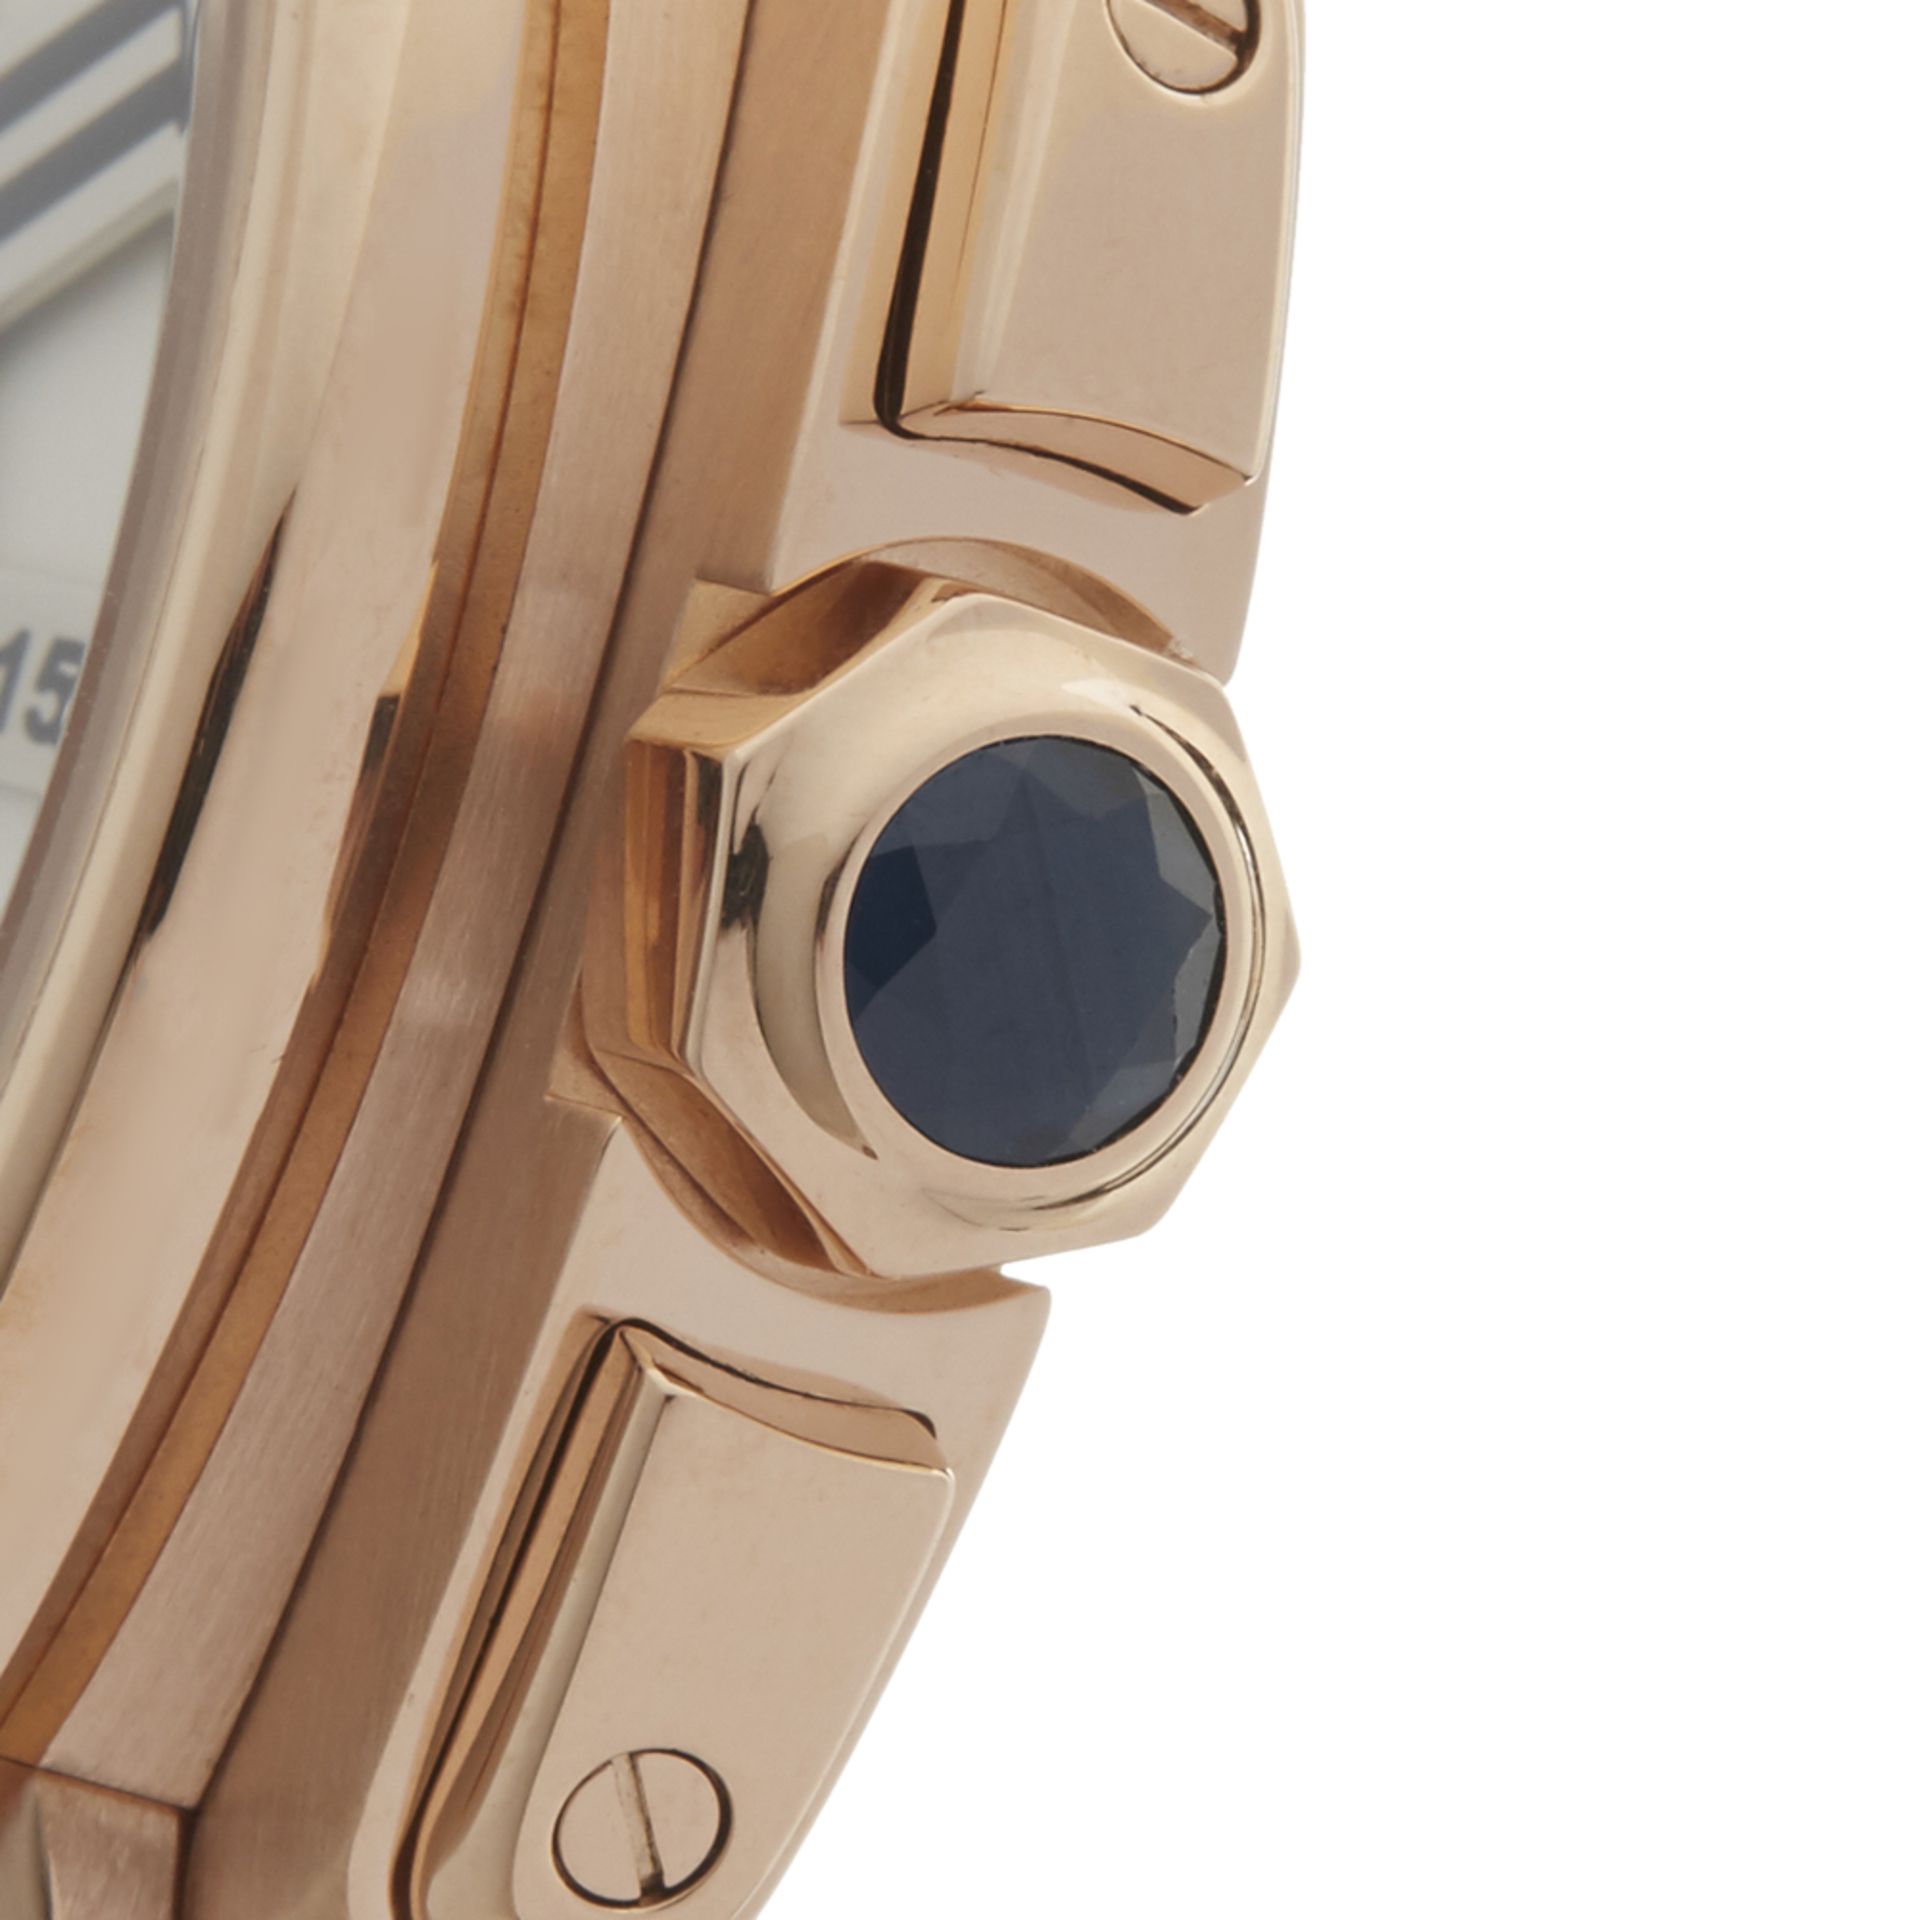 Cartier Calibre Central Chronograph 44mm 18K Rose Gold - 3242 or W7100004 - Image 4 of 9